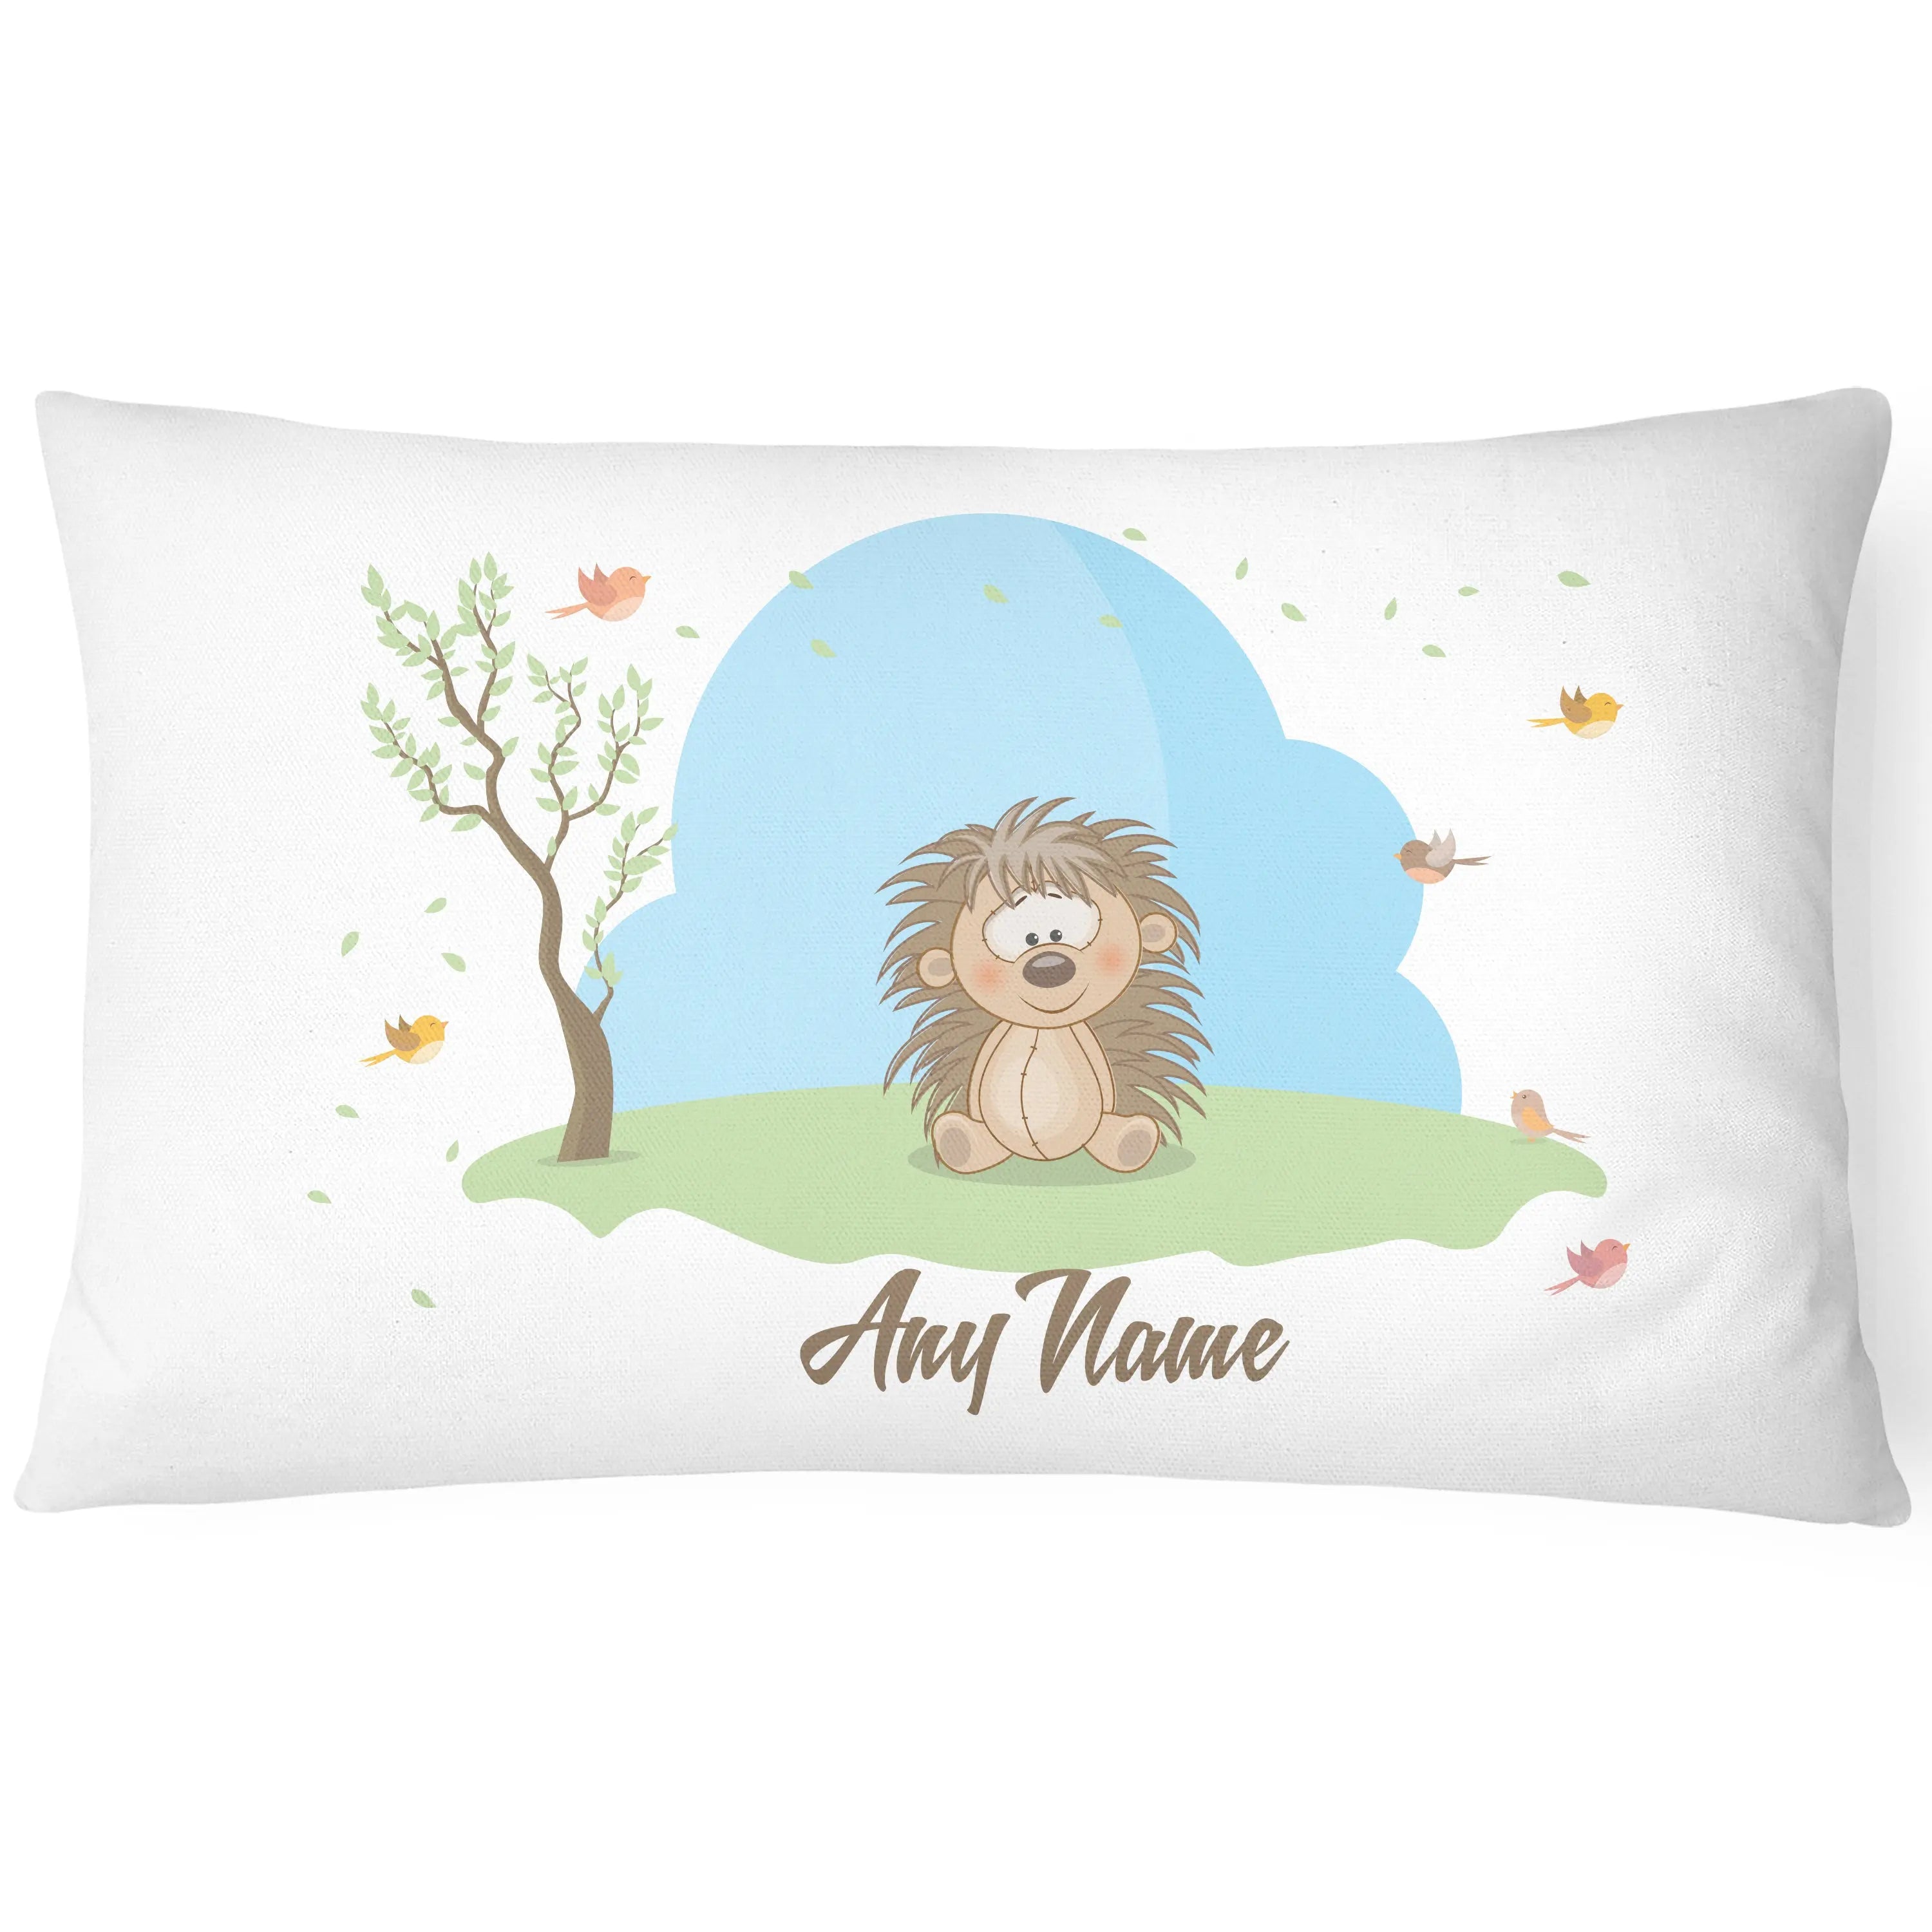 Personalised Children's Pillowcase Cute Animal - Lovable